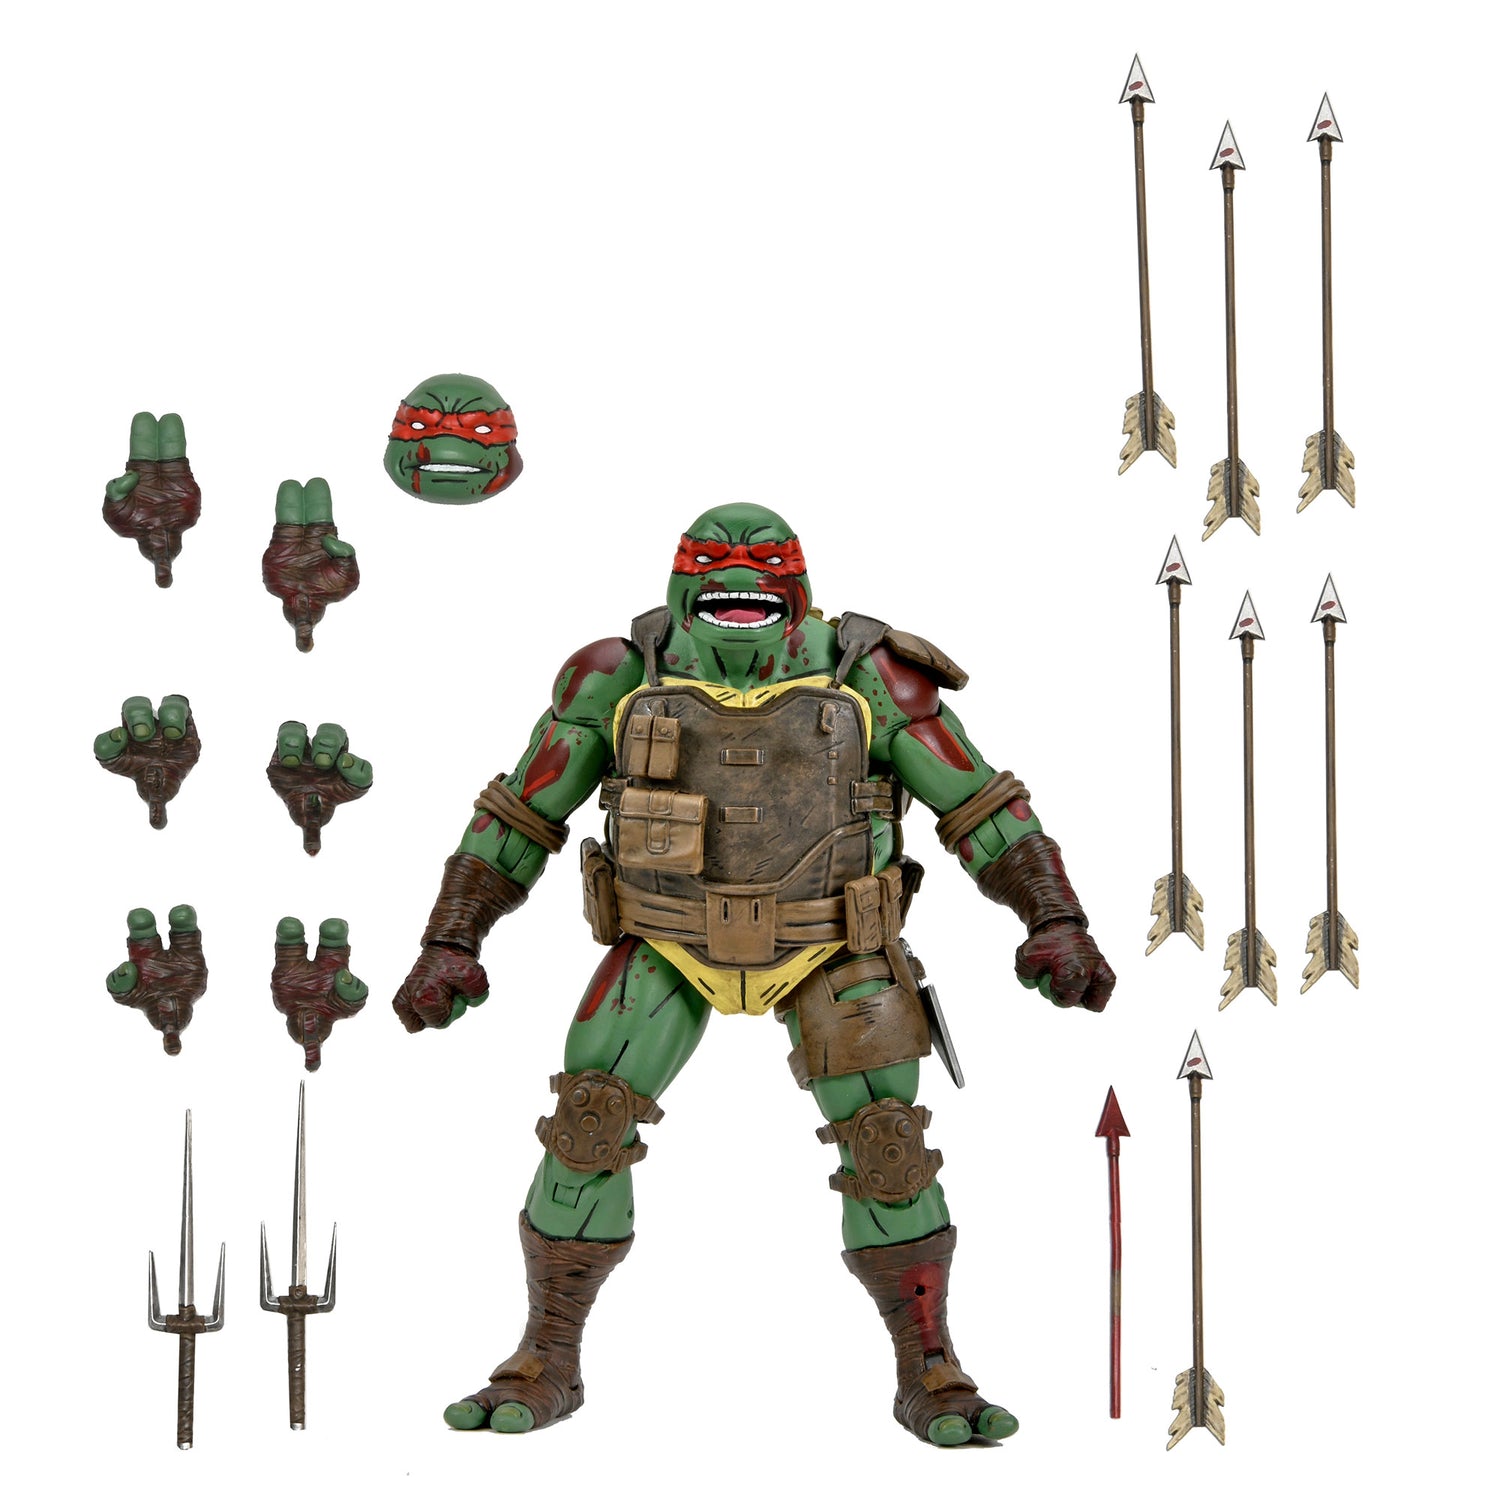 NECA TMNT: Turtles in Time - Wave 2 - 7 Action Figure Set